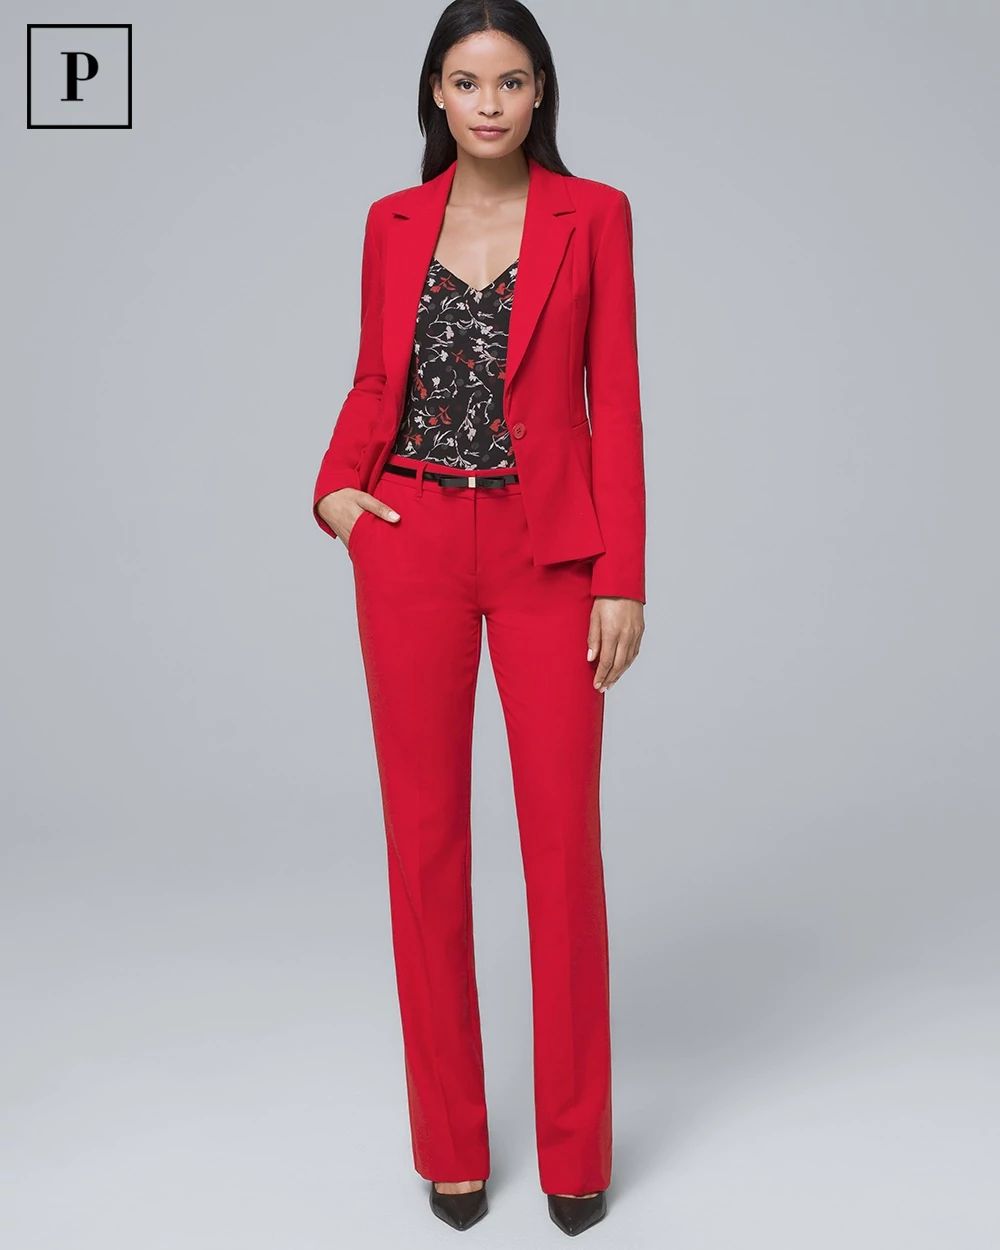 Petite Luxe Suiting Blazer Jacket click to view larger image.